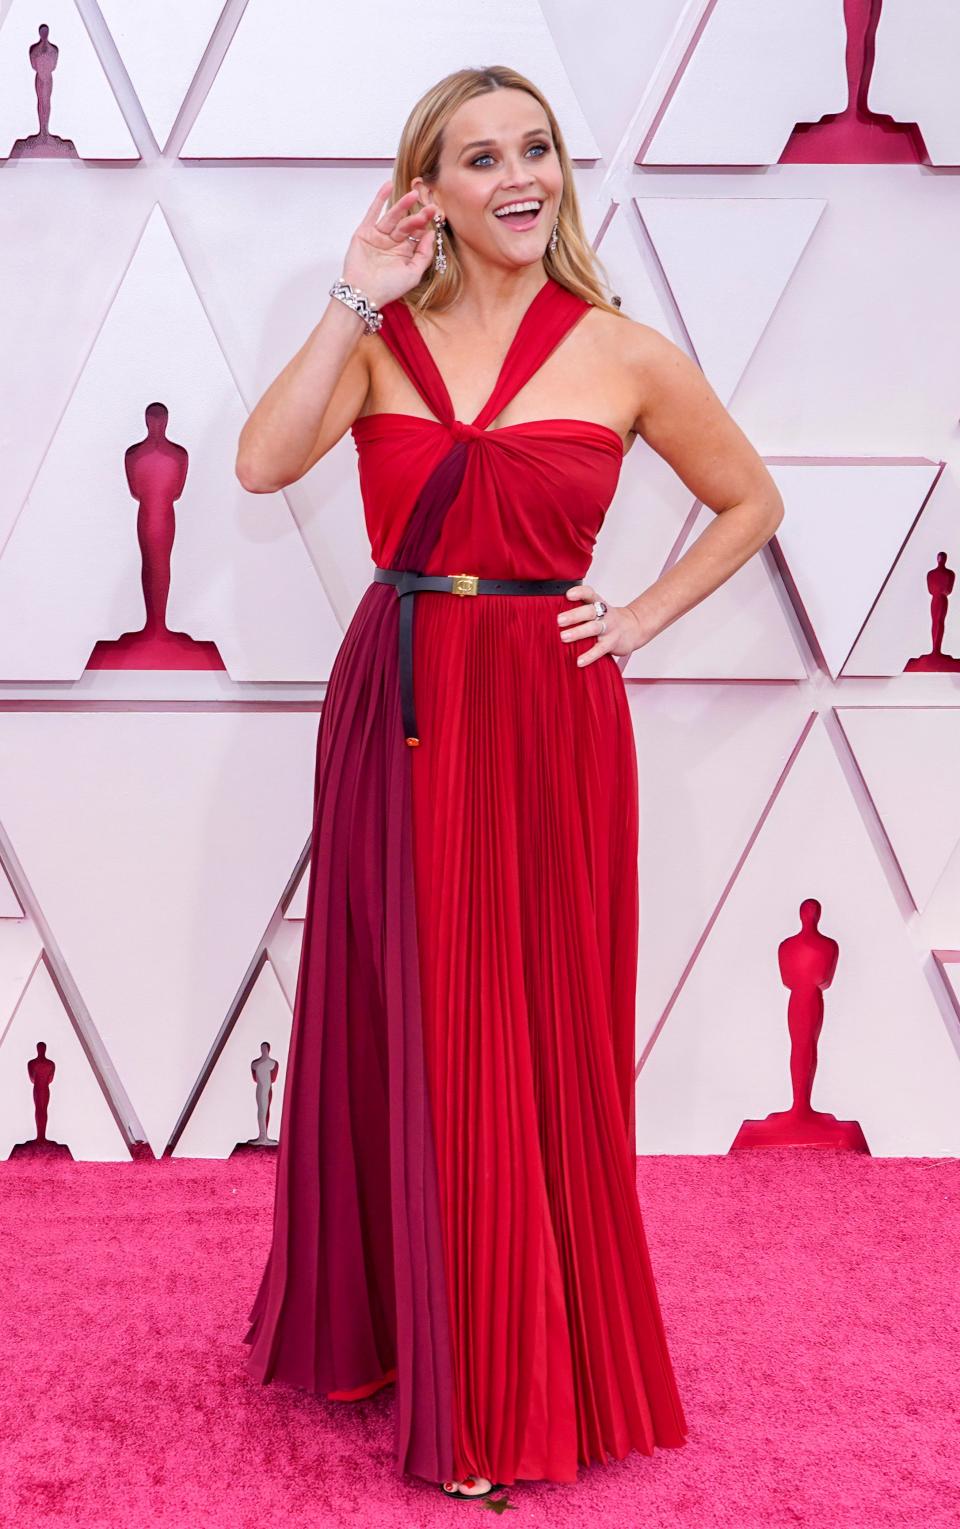 Reese Witherspoon at the 2021 Oscars wearing Christian DiorGetty